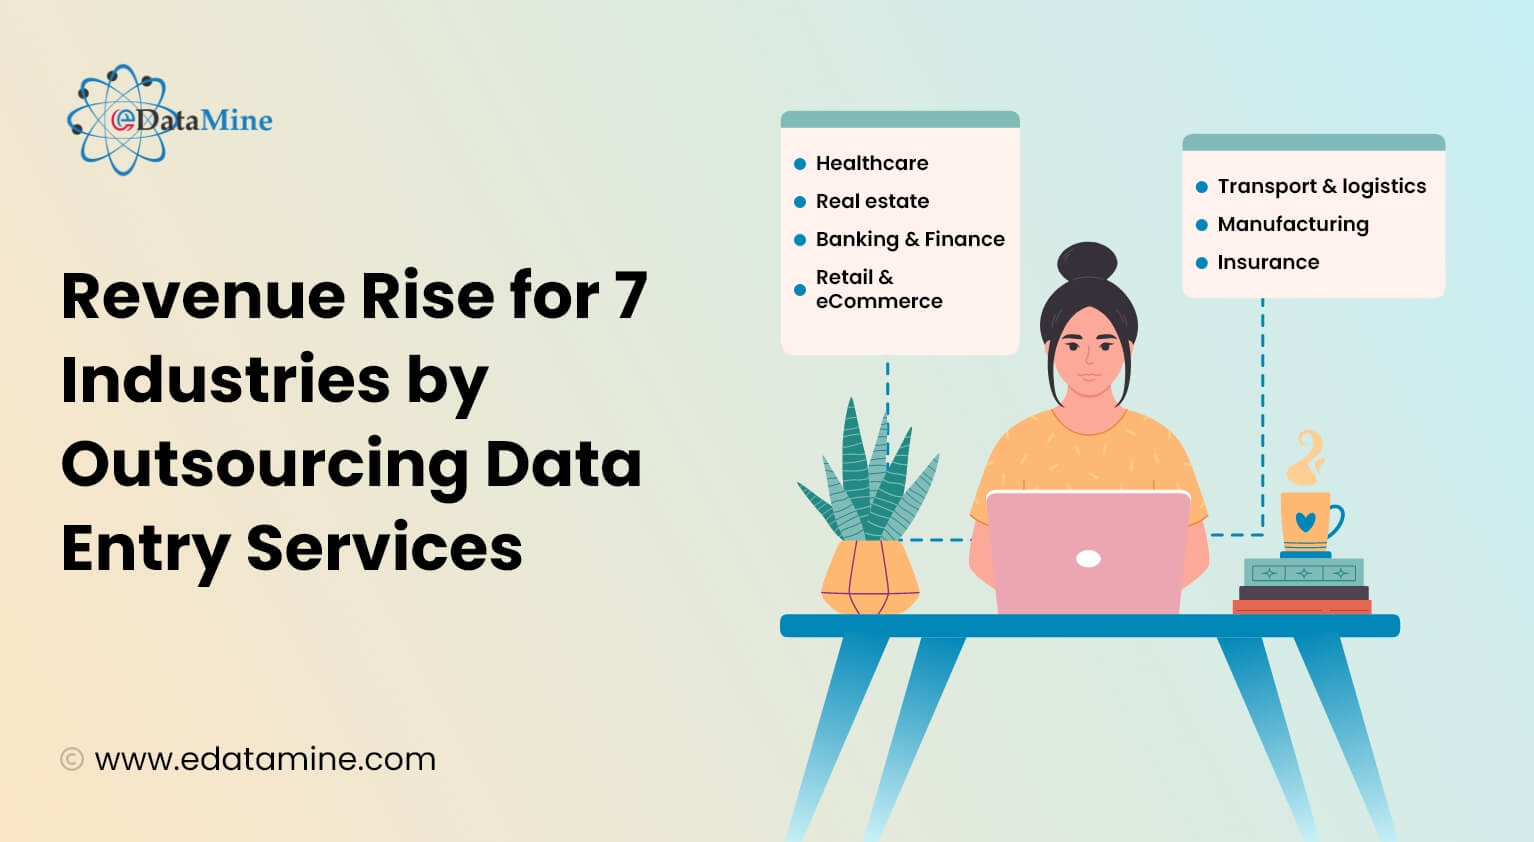 Revenue Rise for 7 Industries by Outsourcing Data Entry Services